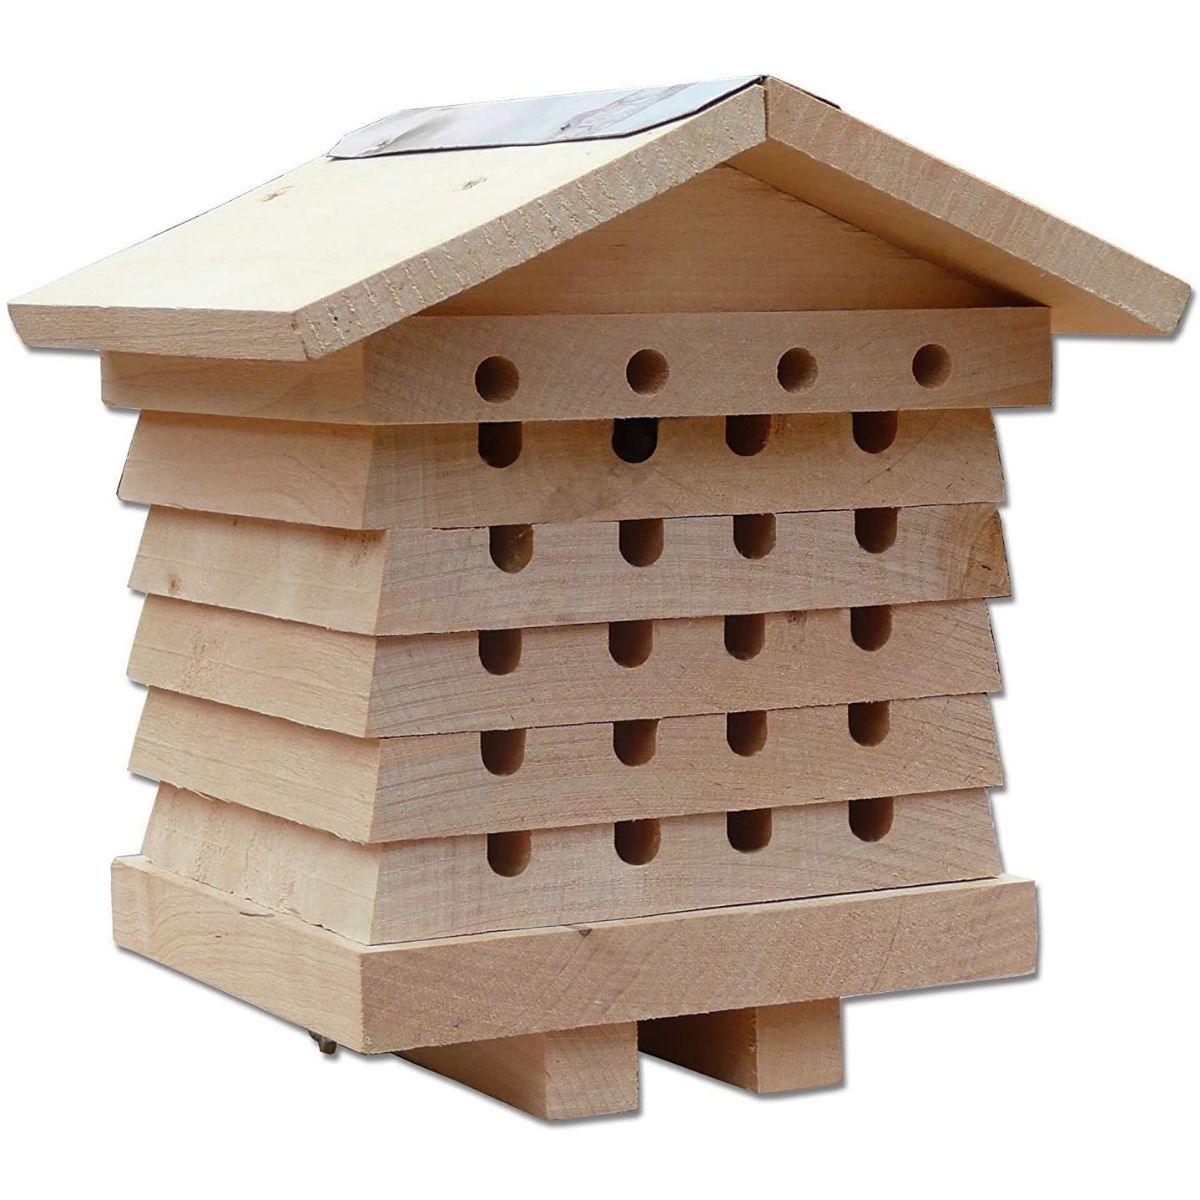 The Gifts for Gardeners Option: SkyMall Mason and Leafcutter Cedar Solitary Bee House